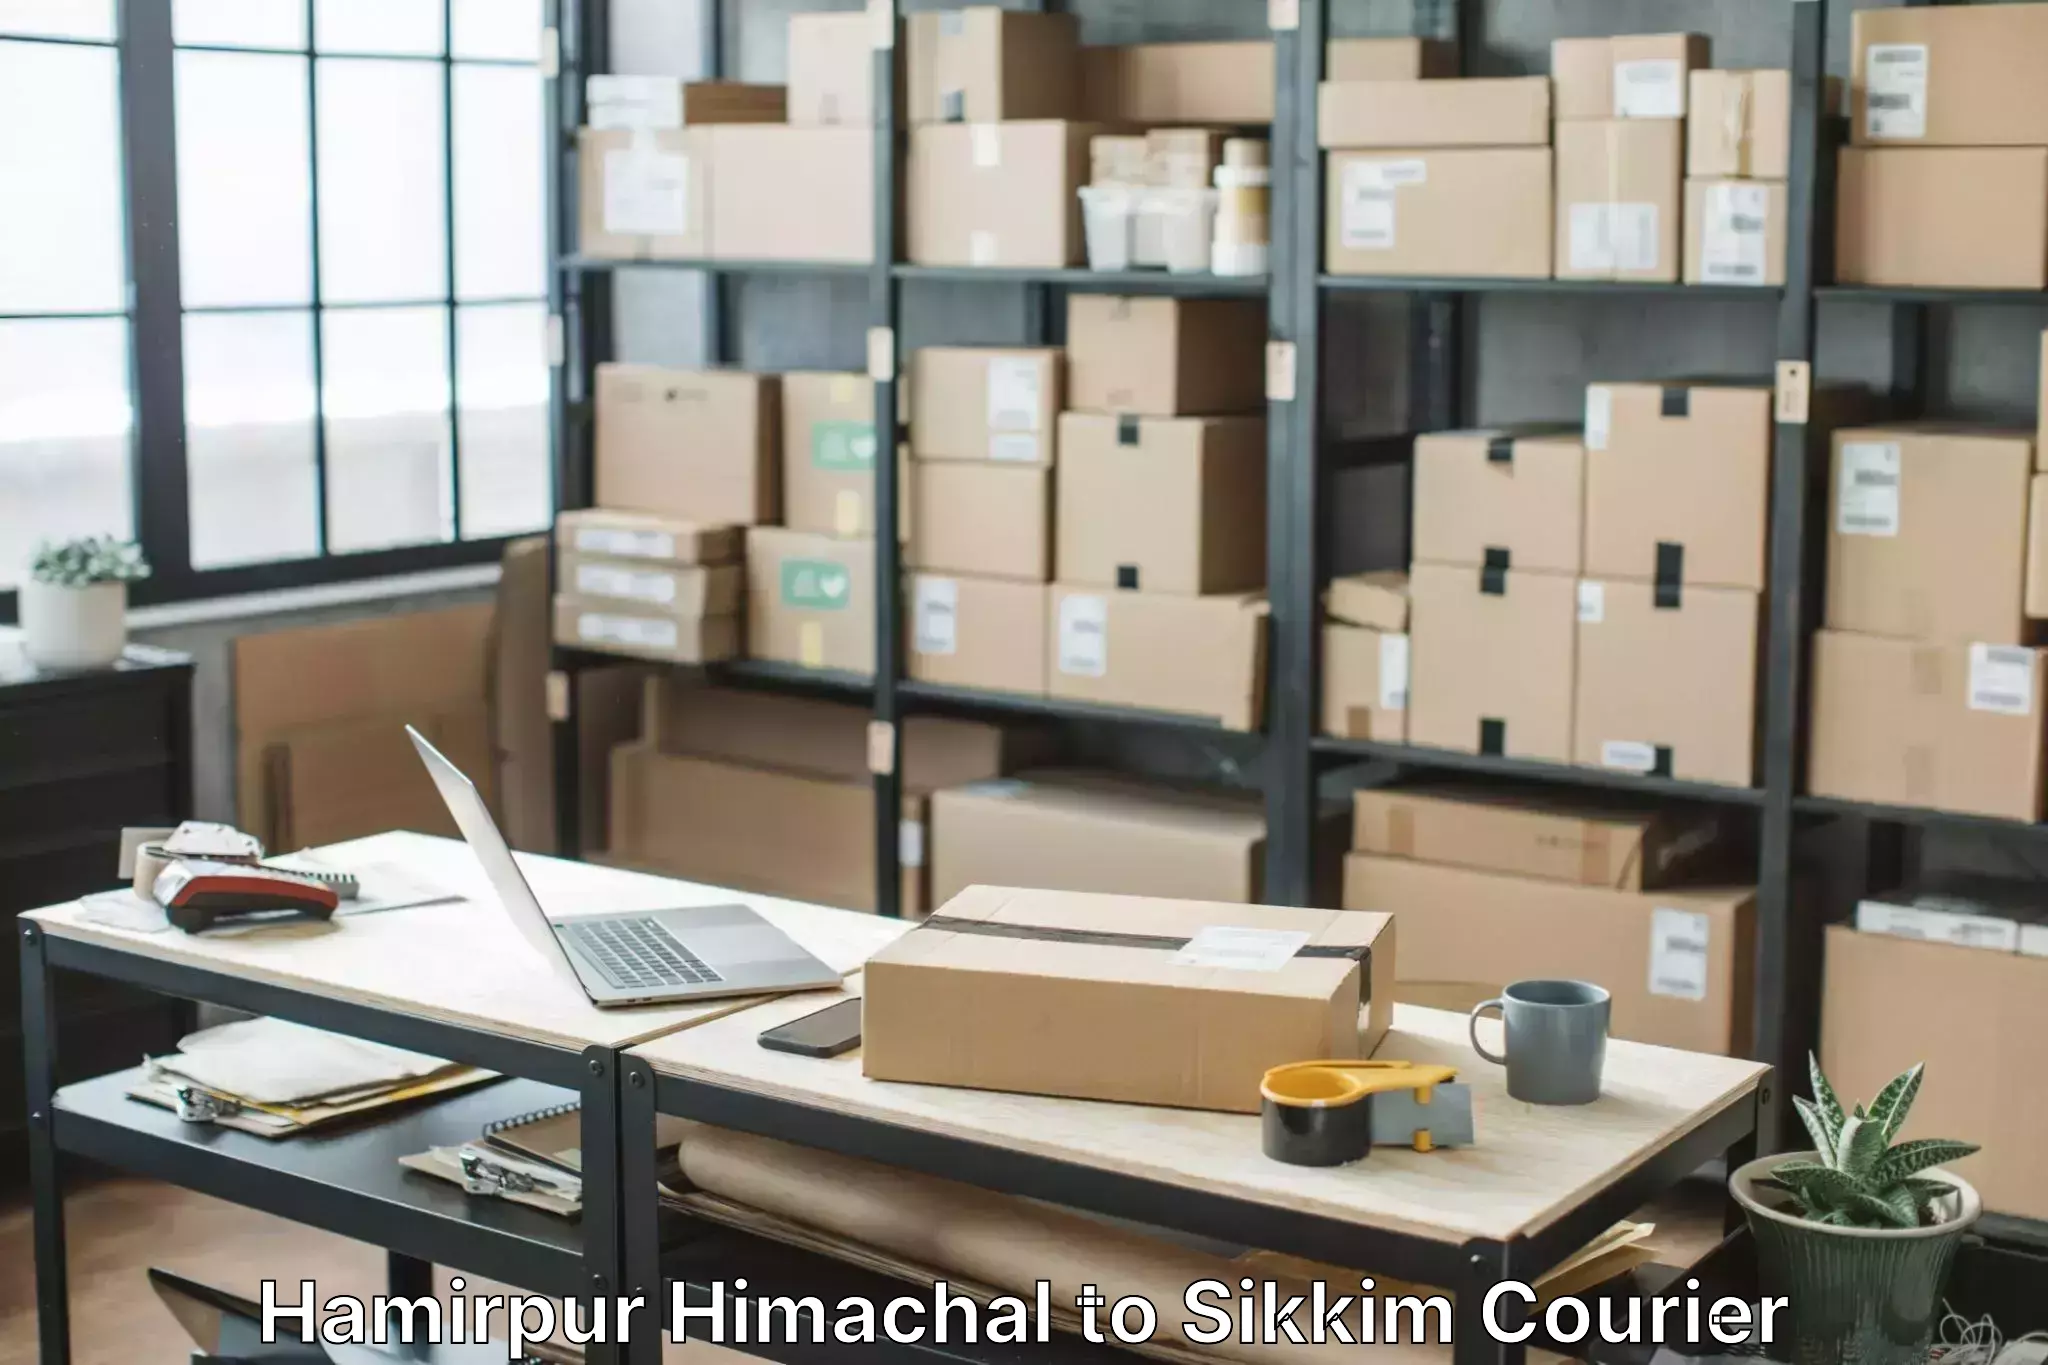 Skilled movers Hamirpur Himachal to Sikkim